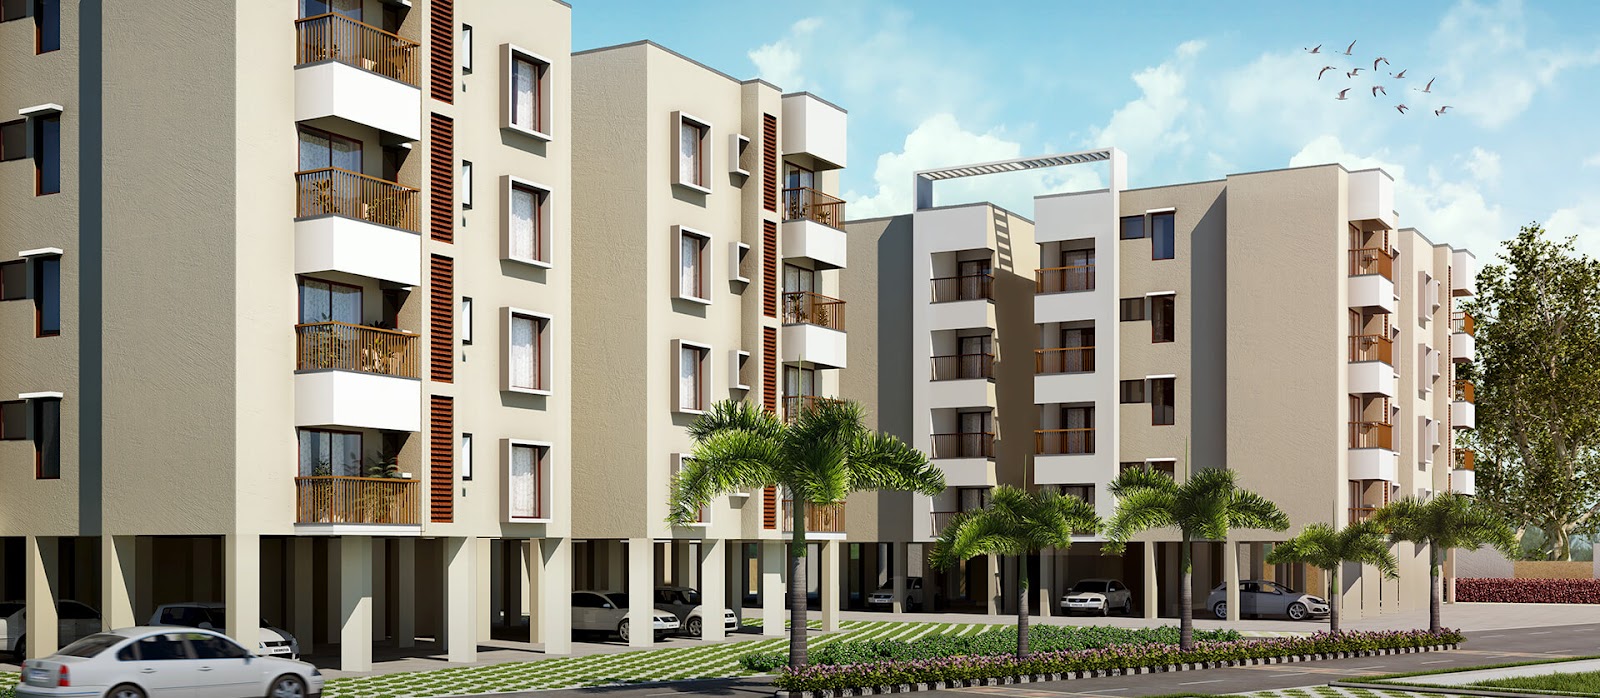 Aratt Cityscapes:Premium 3,4-BHK Villas in Budigere Road & 3,4-BHK Apartments for sale in Budigere Road.Get details on Budigere cross Villa Projects price,location.
